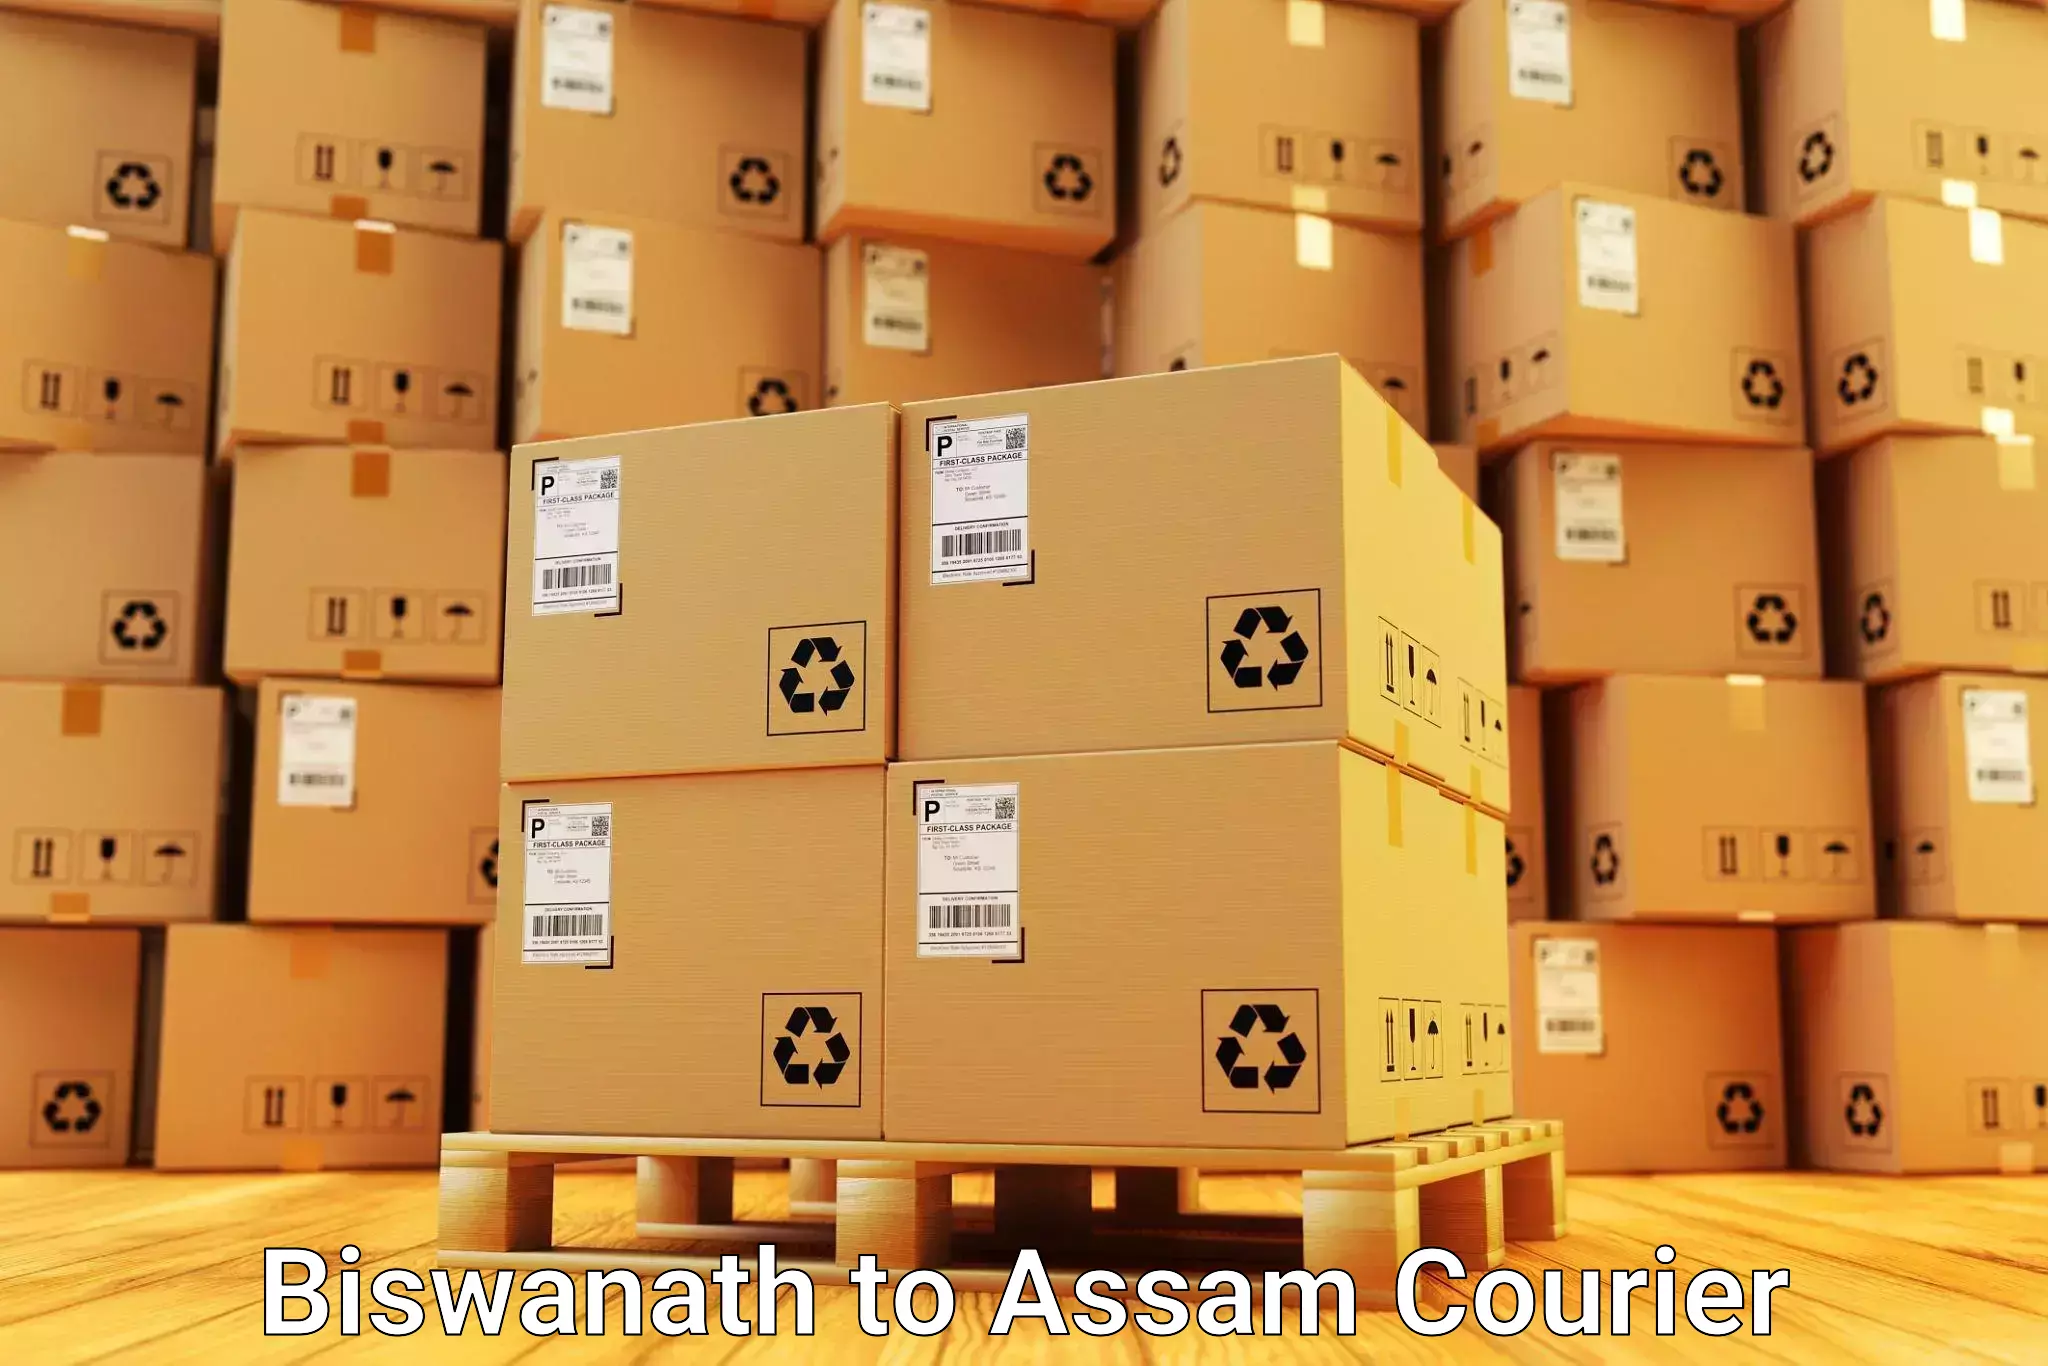 Professional furniture movers Biswanath to Rupai Siding